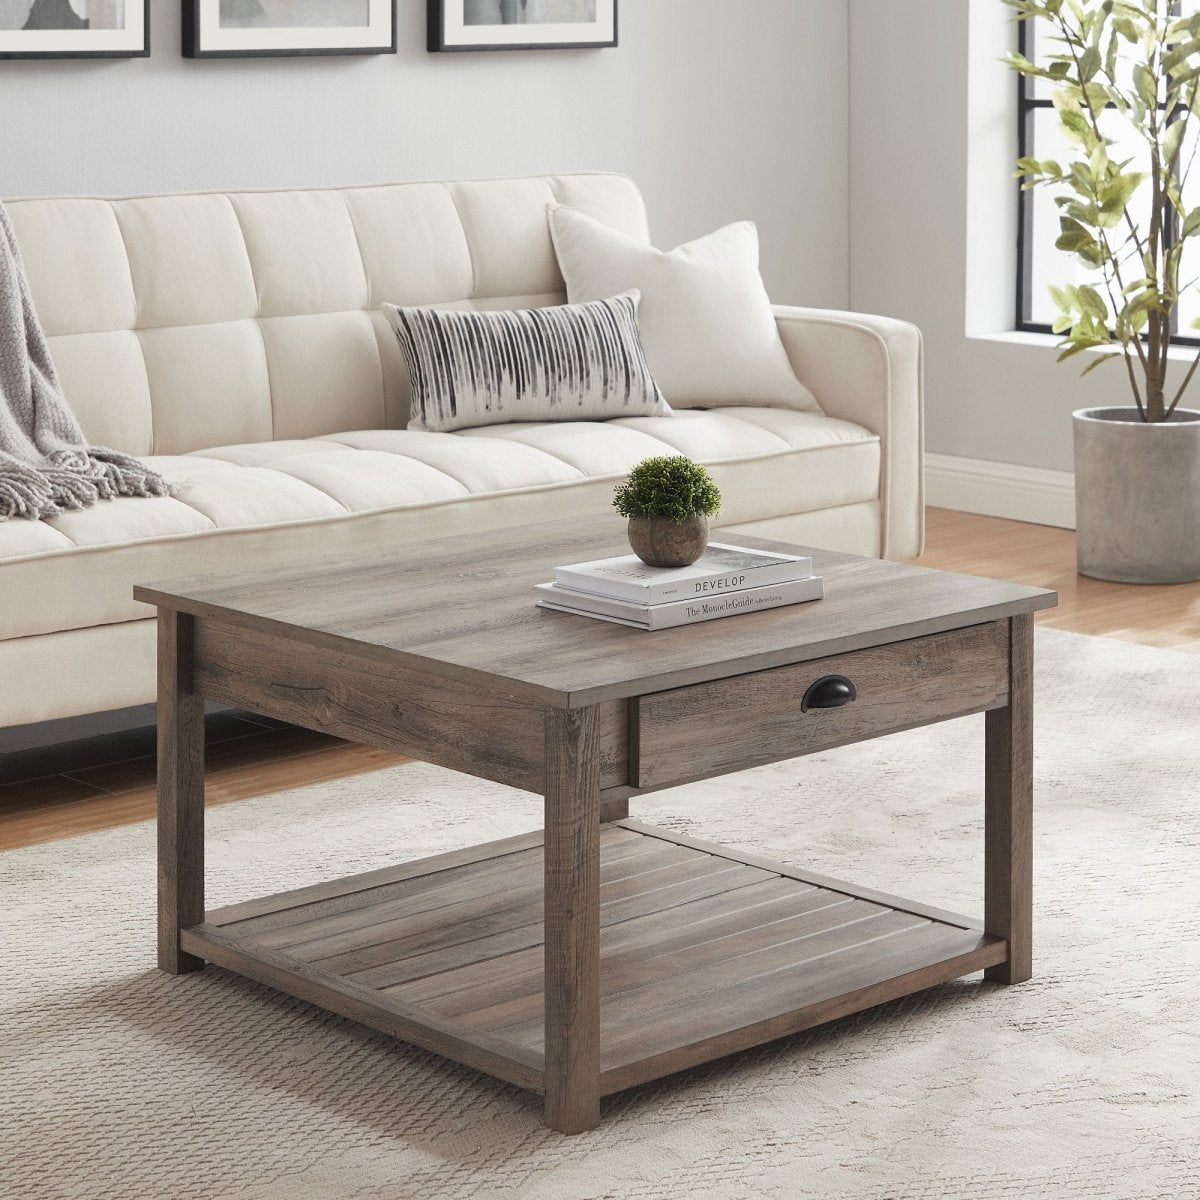 Walker Edison Country Coffee Table - lily & onyx